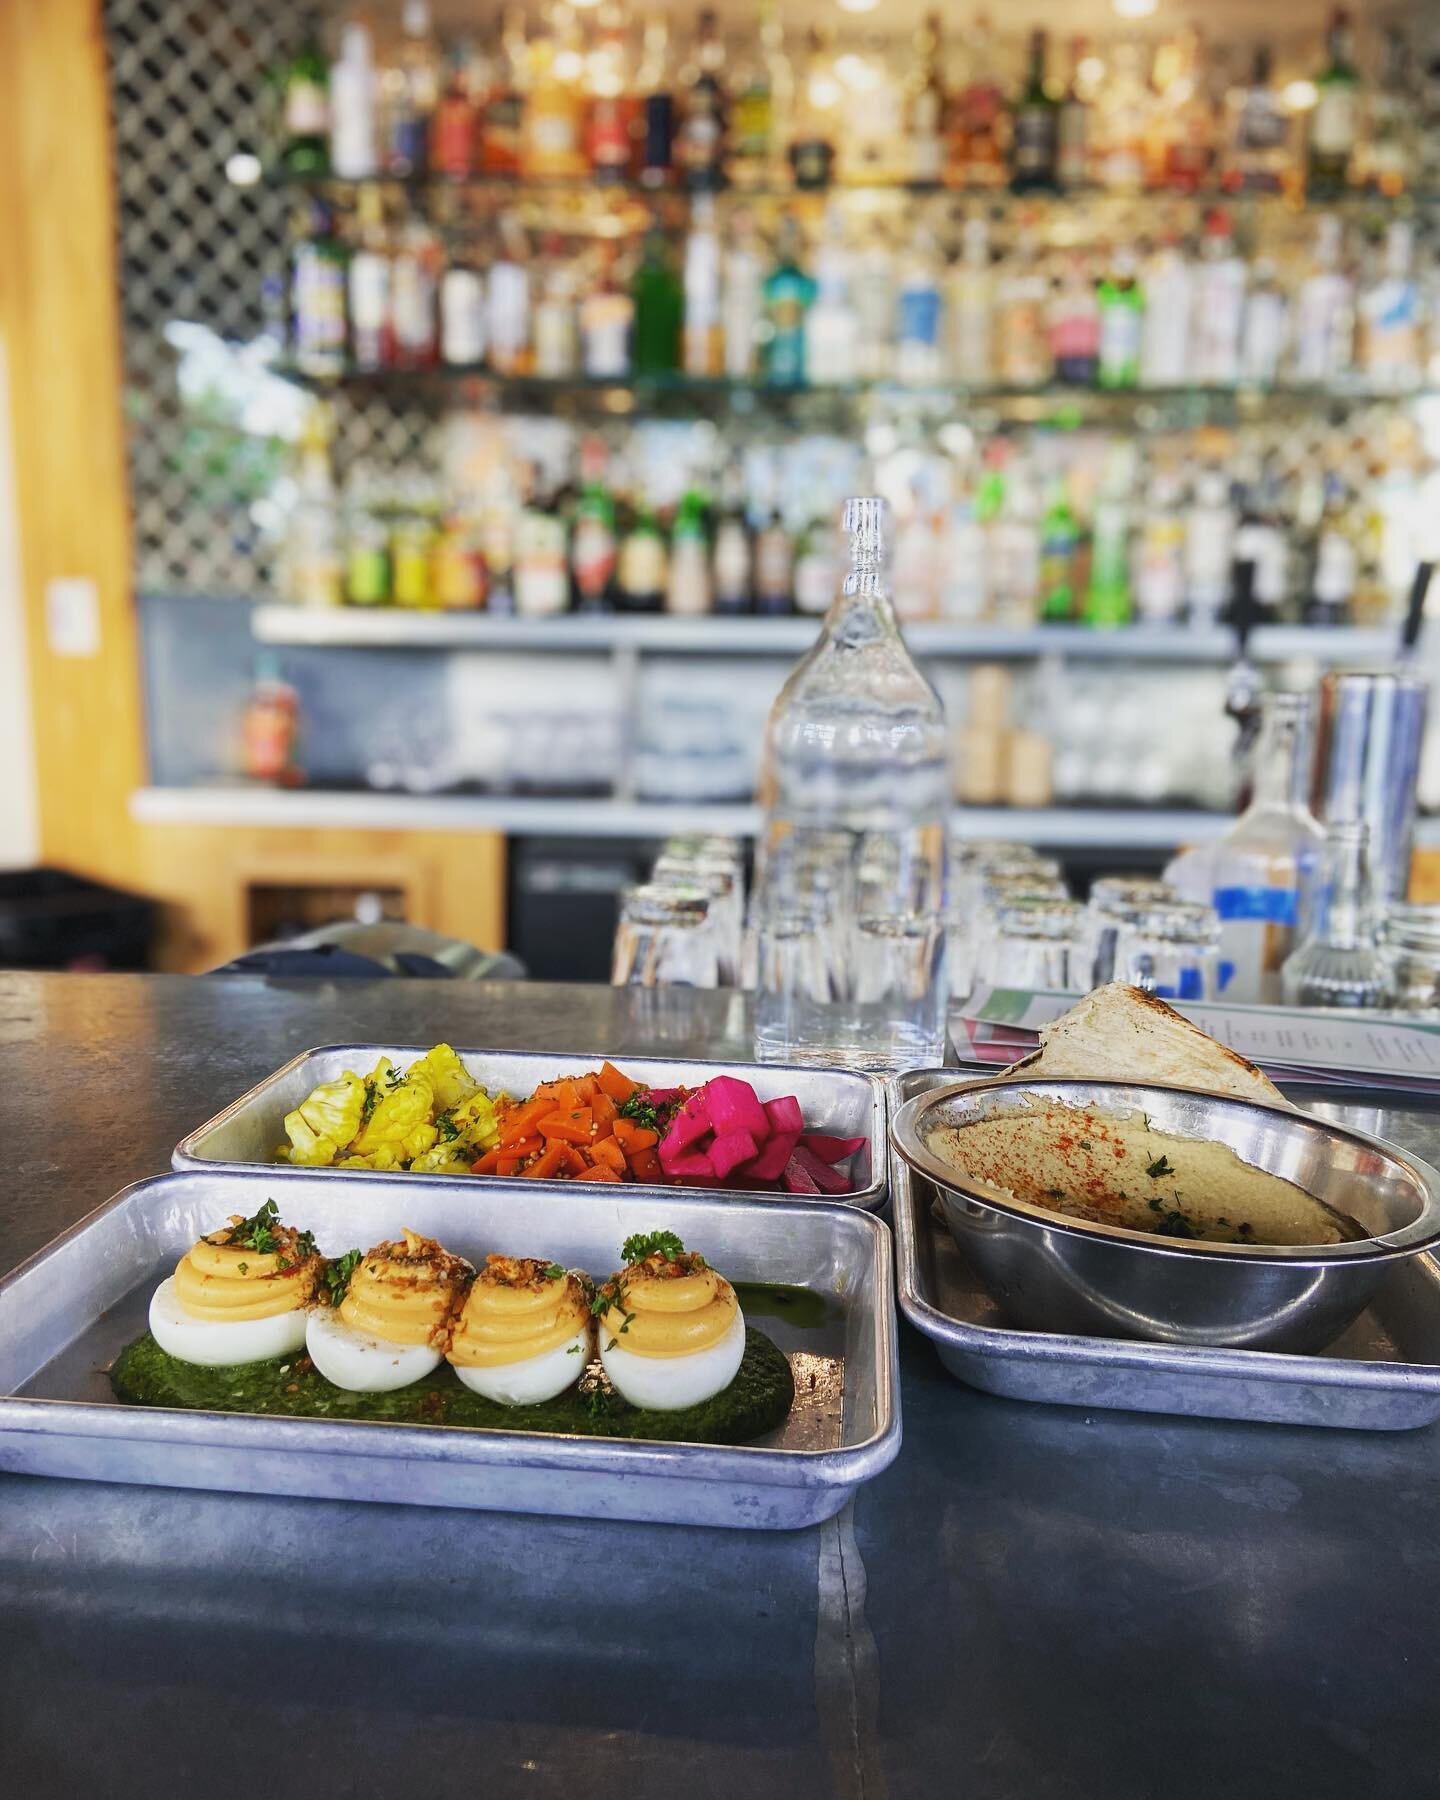 We&rsquo;re lucky to have such an approachable and diverse food culture in #portlandmaine. Thanks to @baharat_portland for serving us these tasty middle eastern bites. #portlandmainefood #bedandbreakfast #westendinn #inn